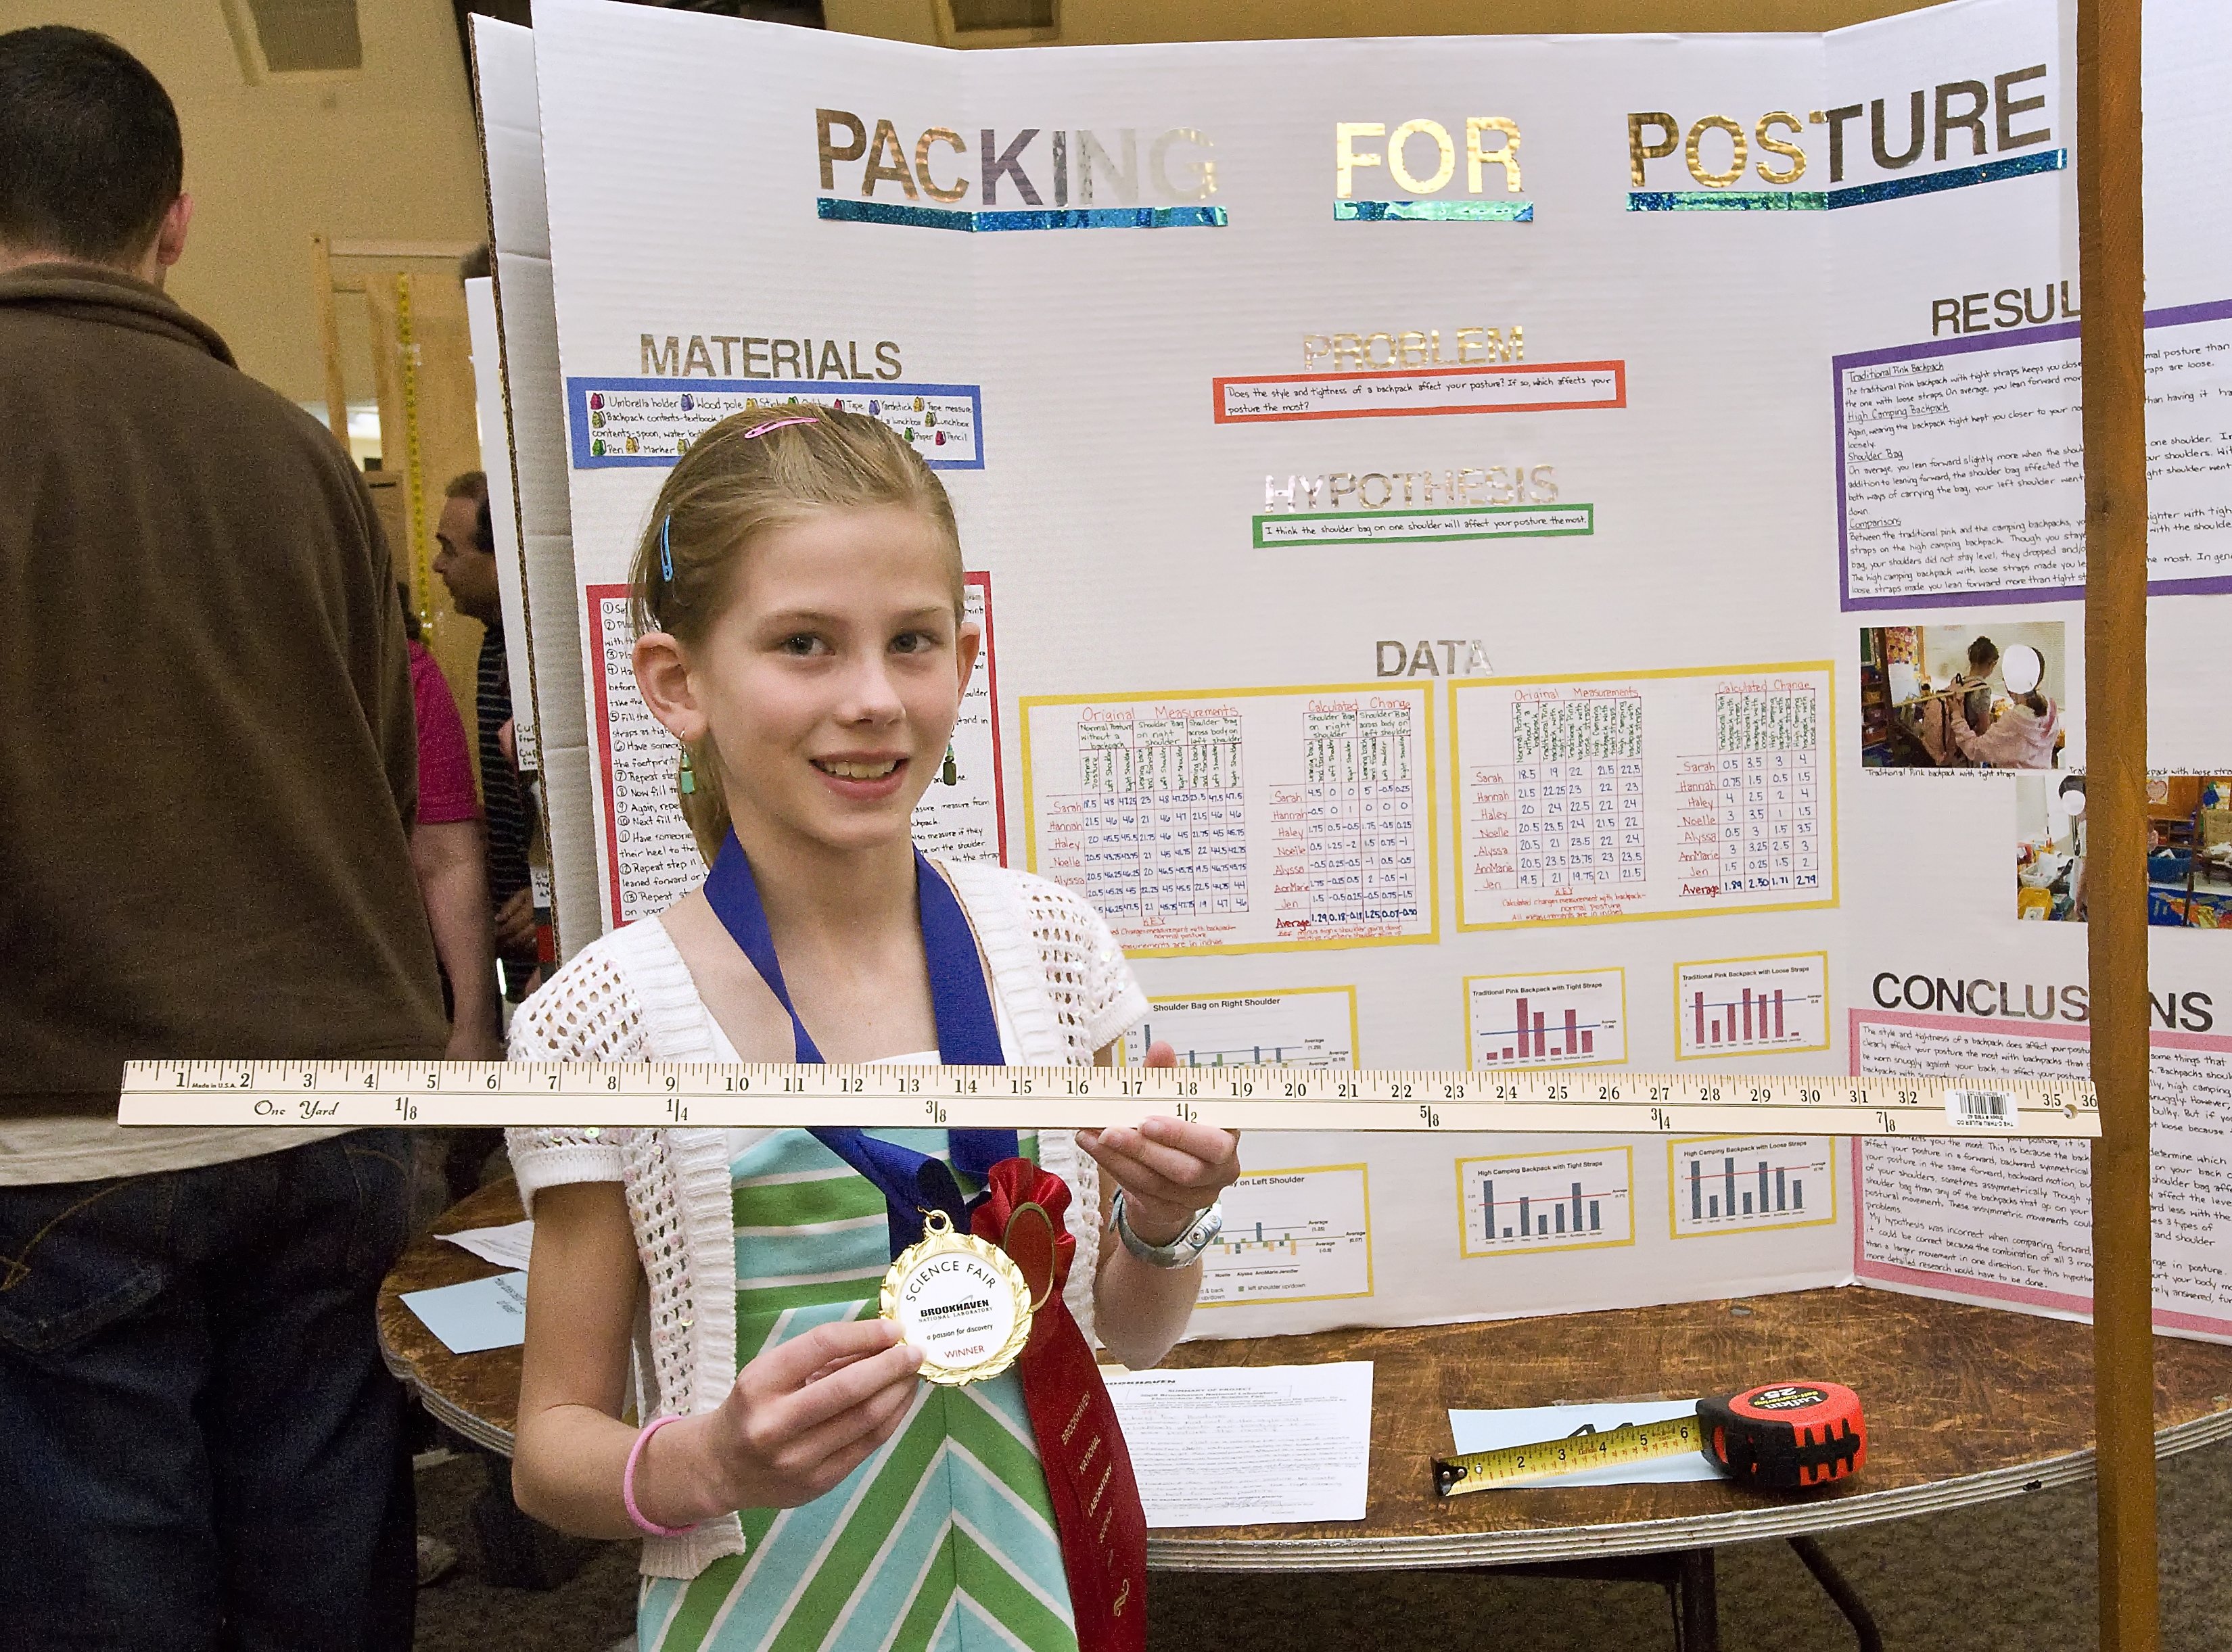 10 Famous Science Fair Projects Ideas For 4Th Graders captivating 4th grade science projects ideas magnets in from ant 2022